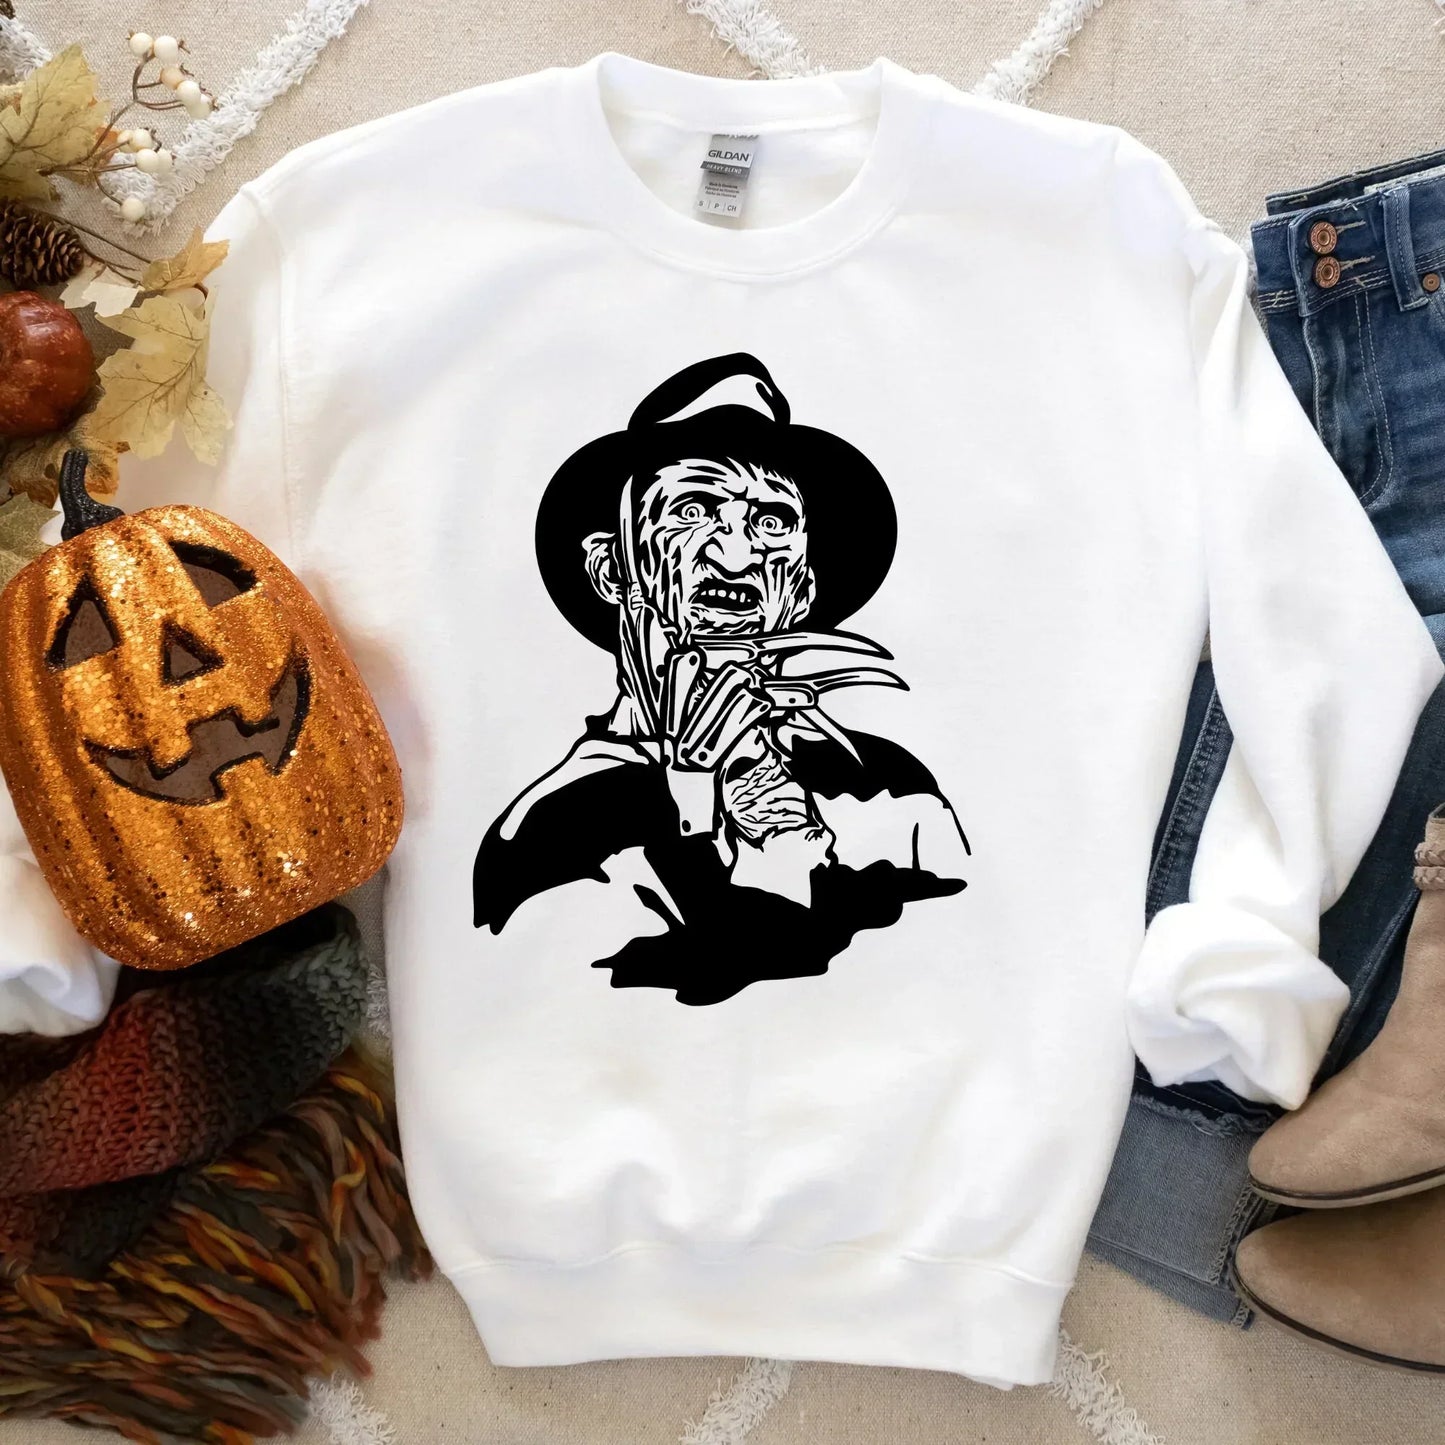 Freddy Horror Movie Shirt, Scary Sweater, Spooky Crewneck, Creepy Sweatshirt, Horror and Chill Lover, Fright Night Gift for Men Women HMDesignStudioUS